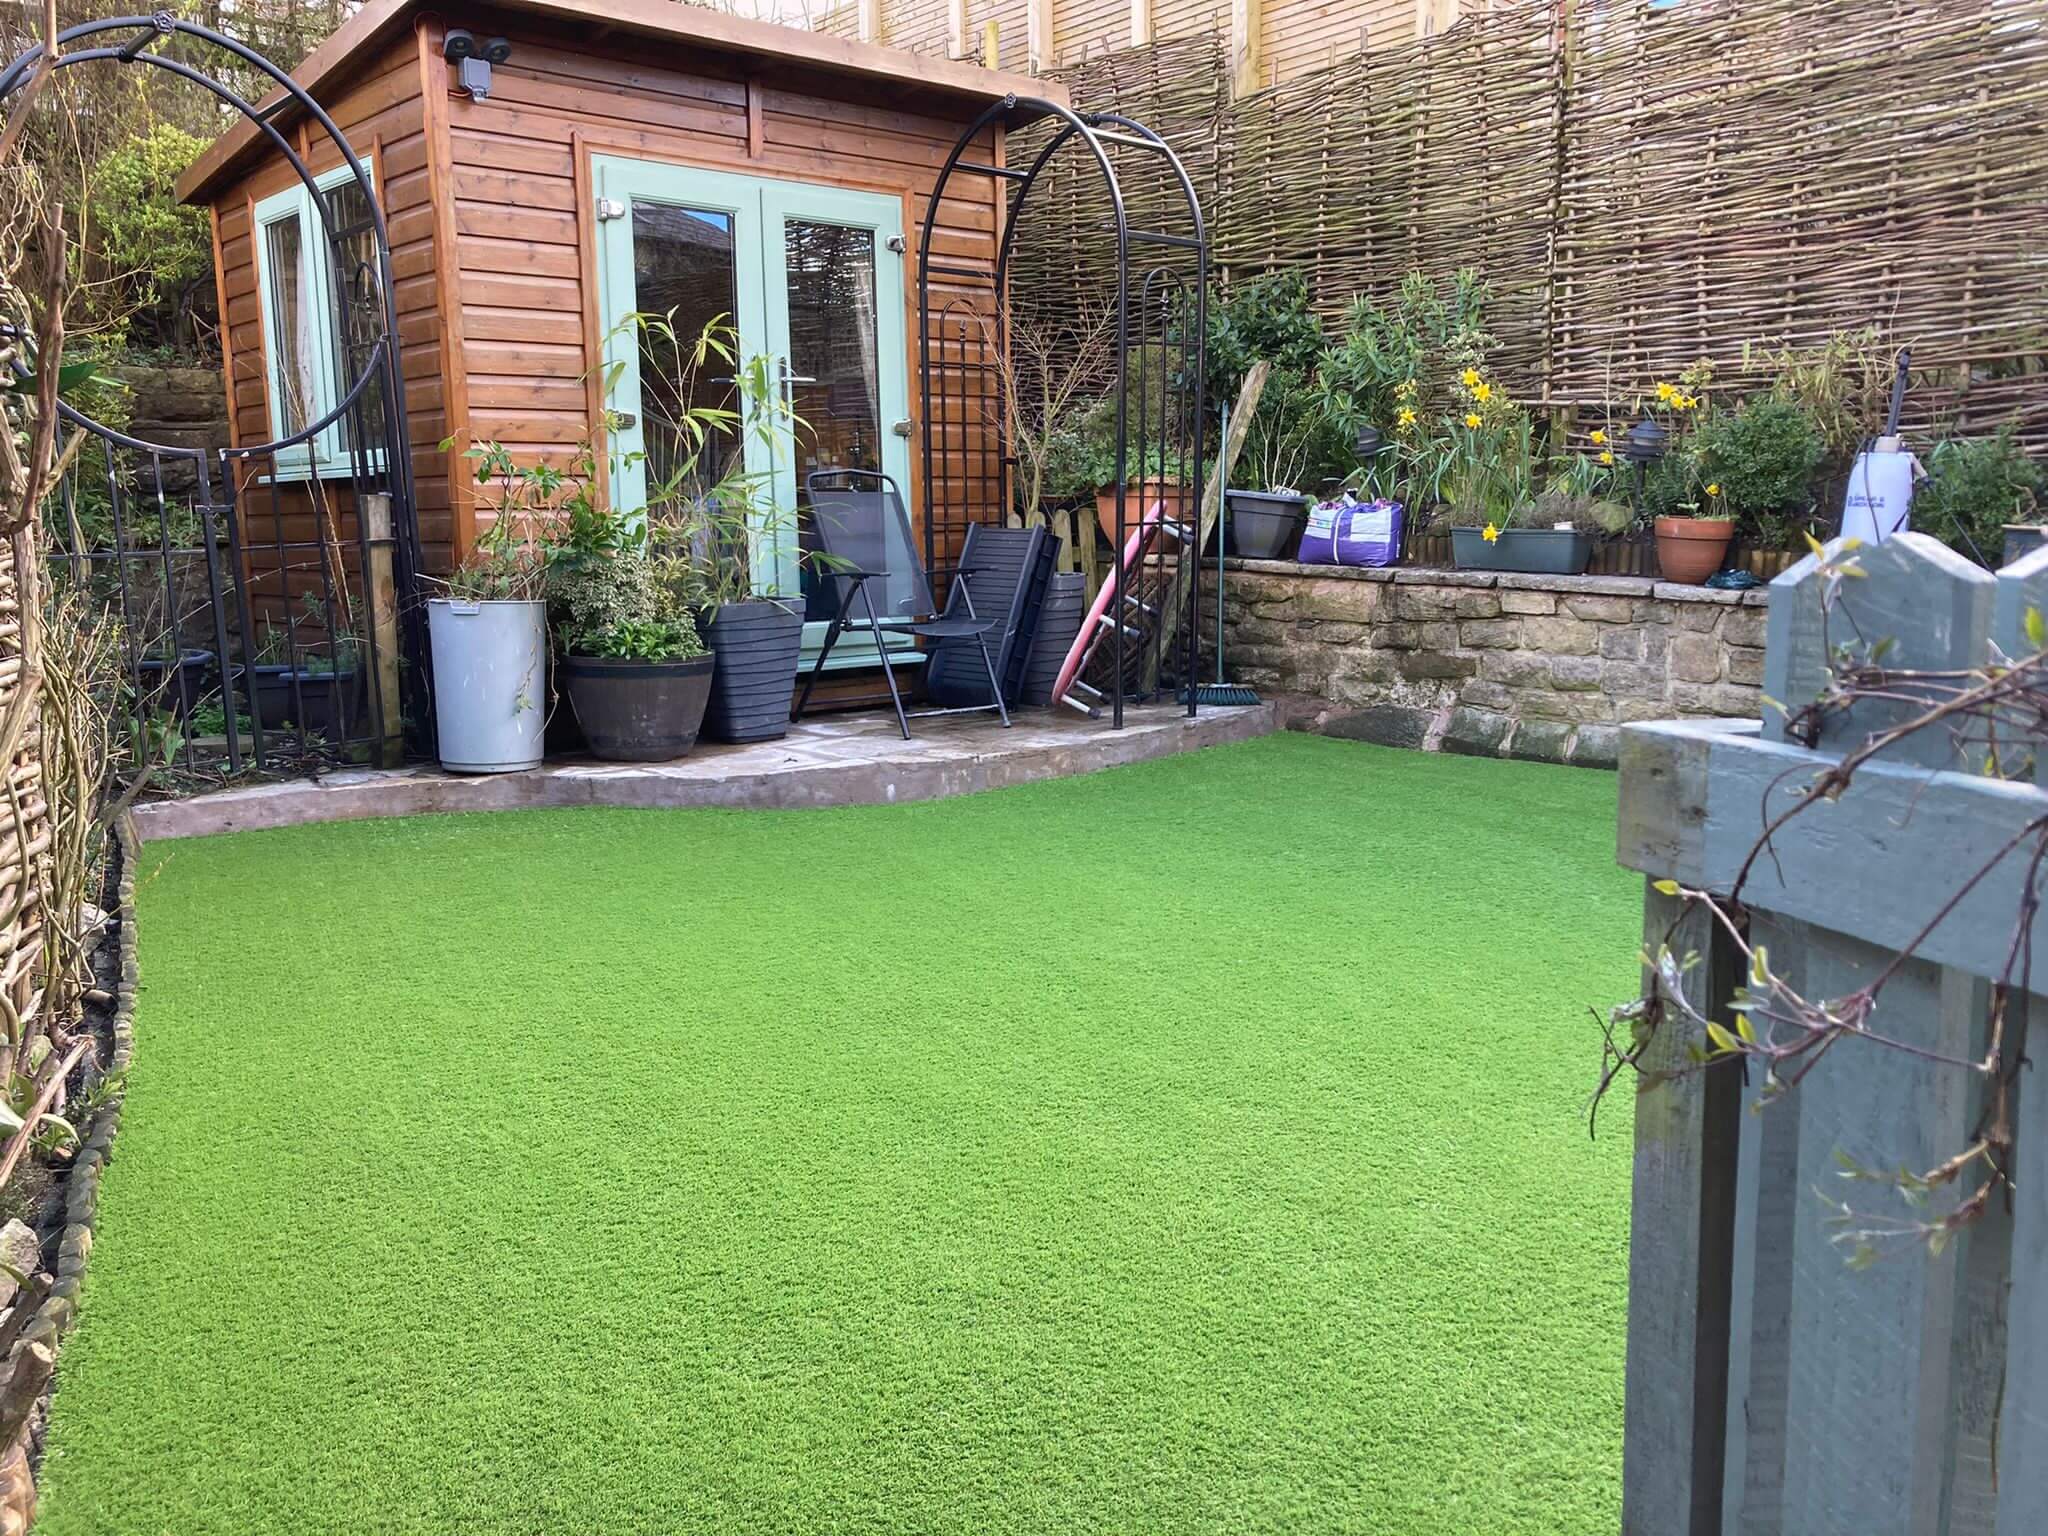 Photo of avonside dog boarding garden with new and clean artificial grass fitted.